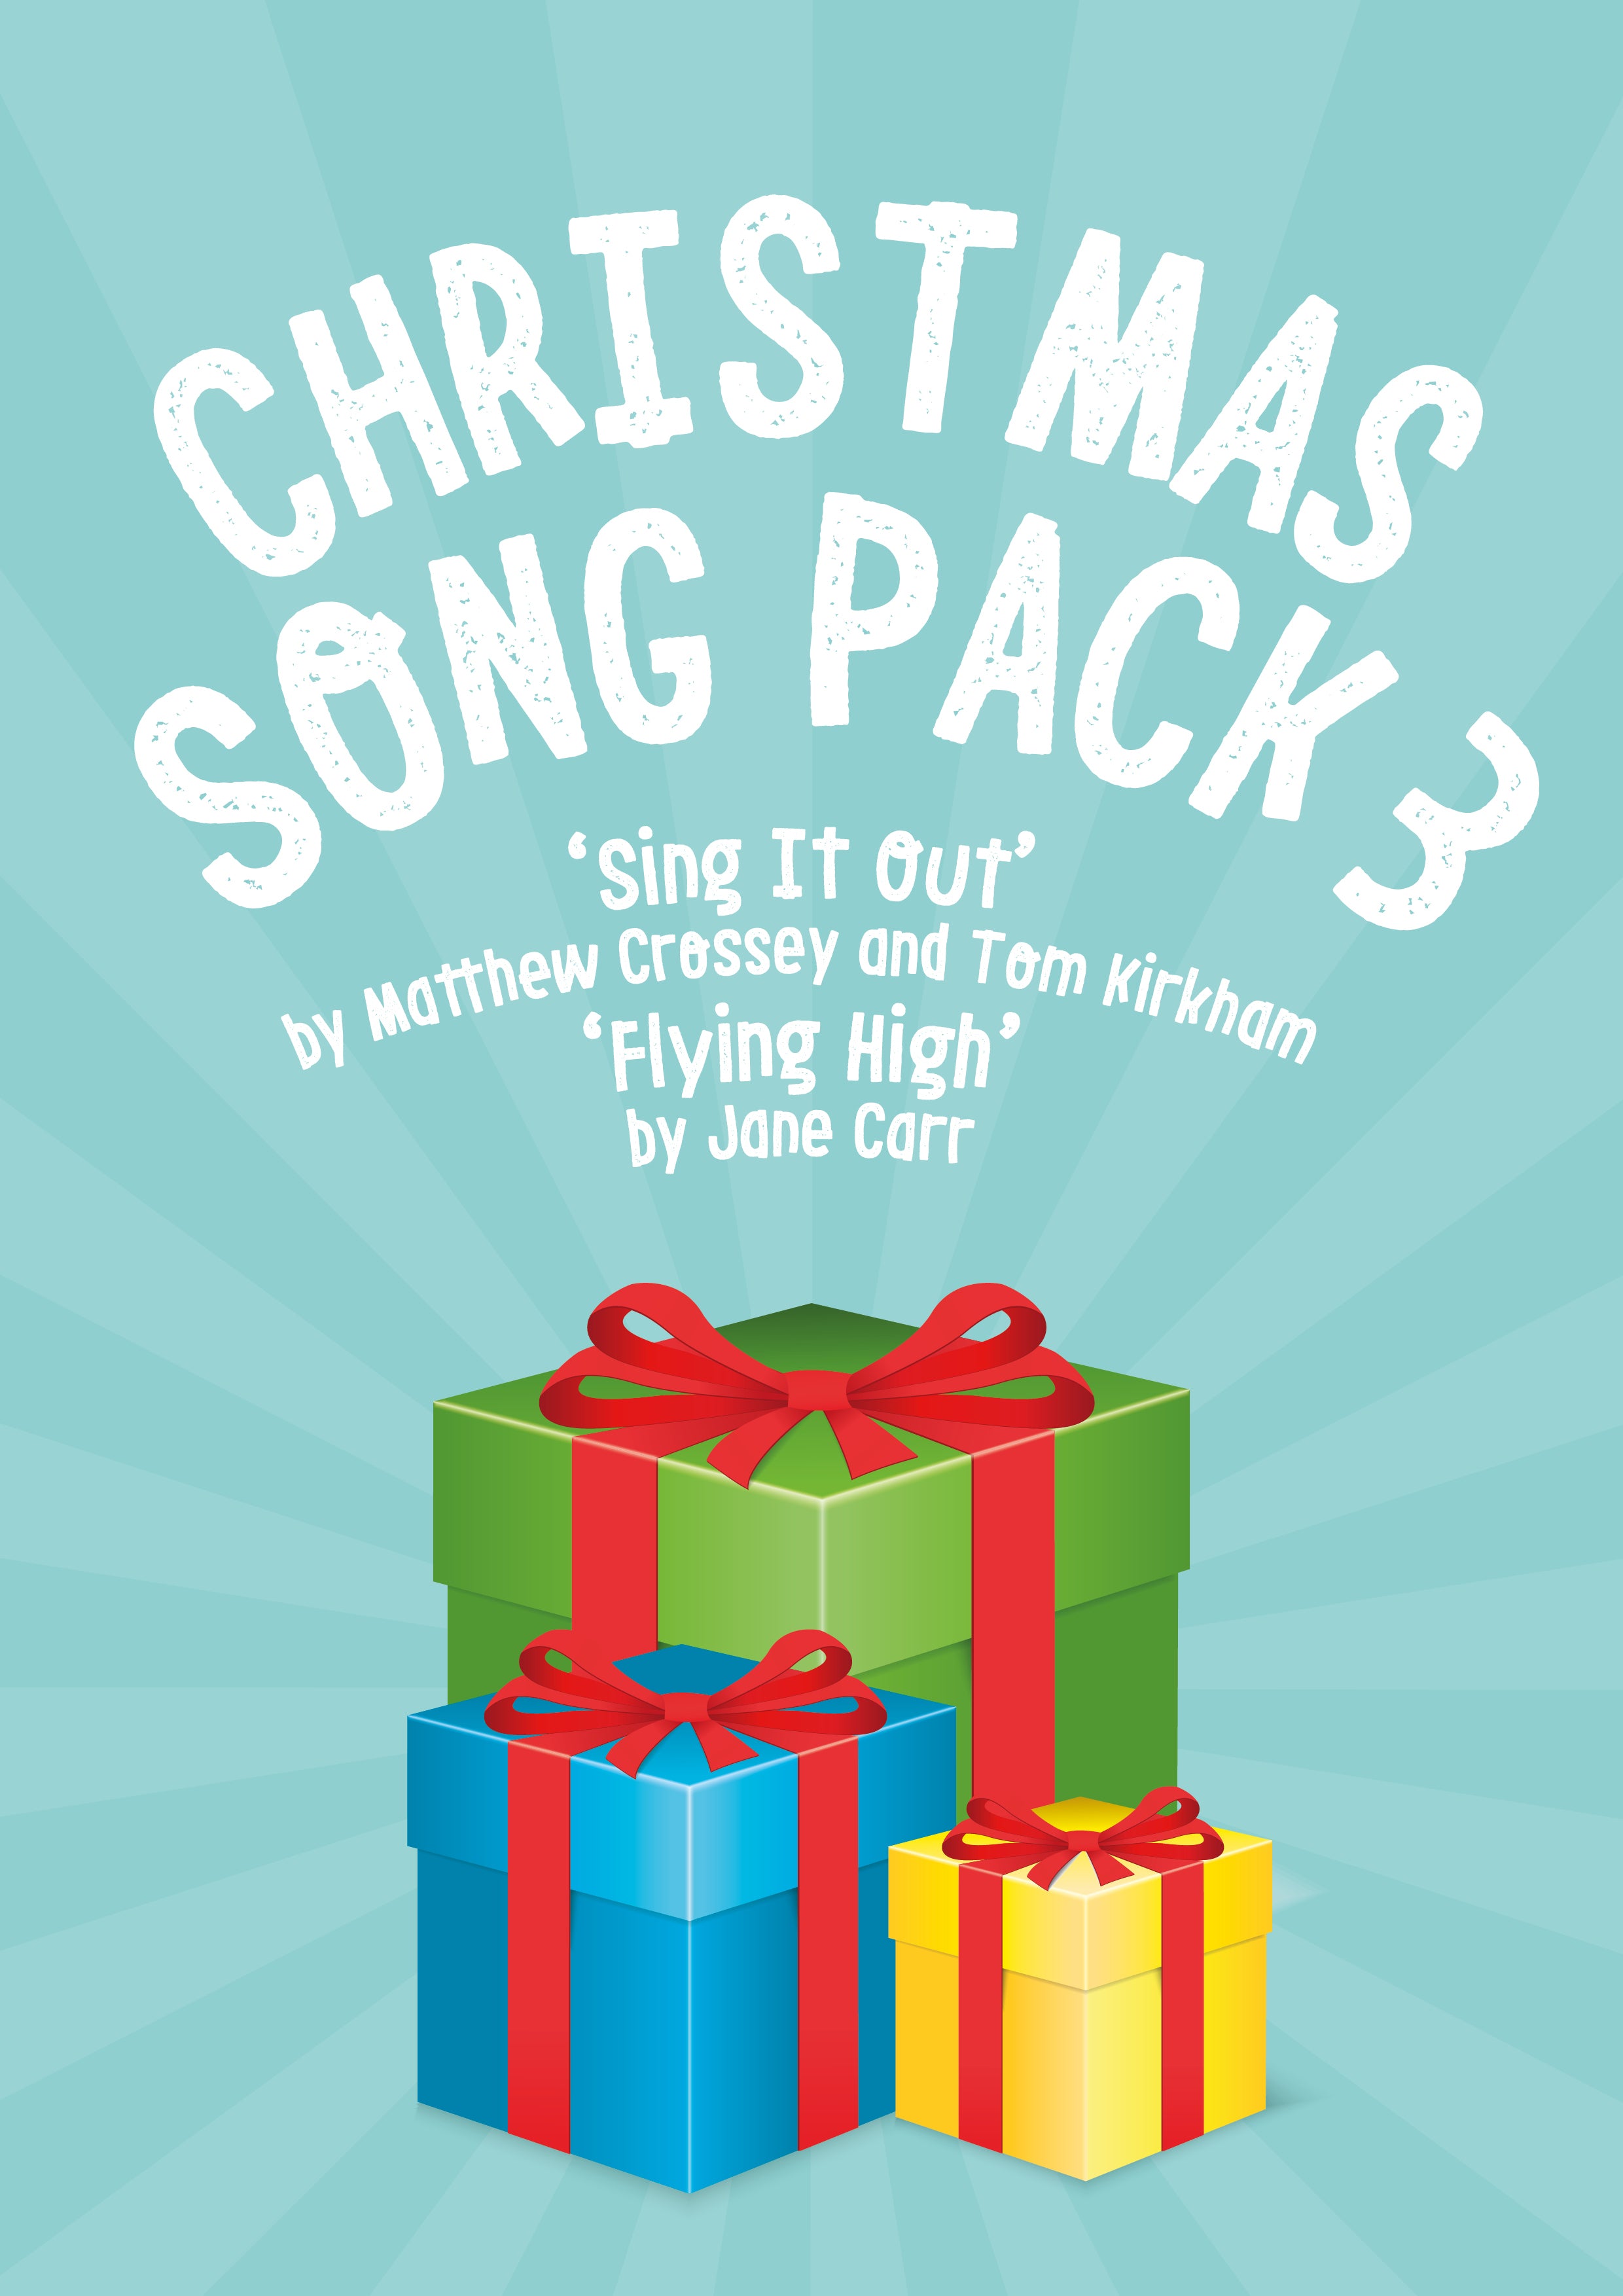 Christmas Songs Download Pack Three - 100% discount with code CHRISTMAS3